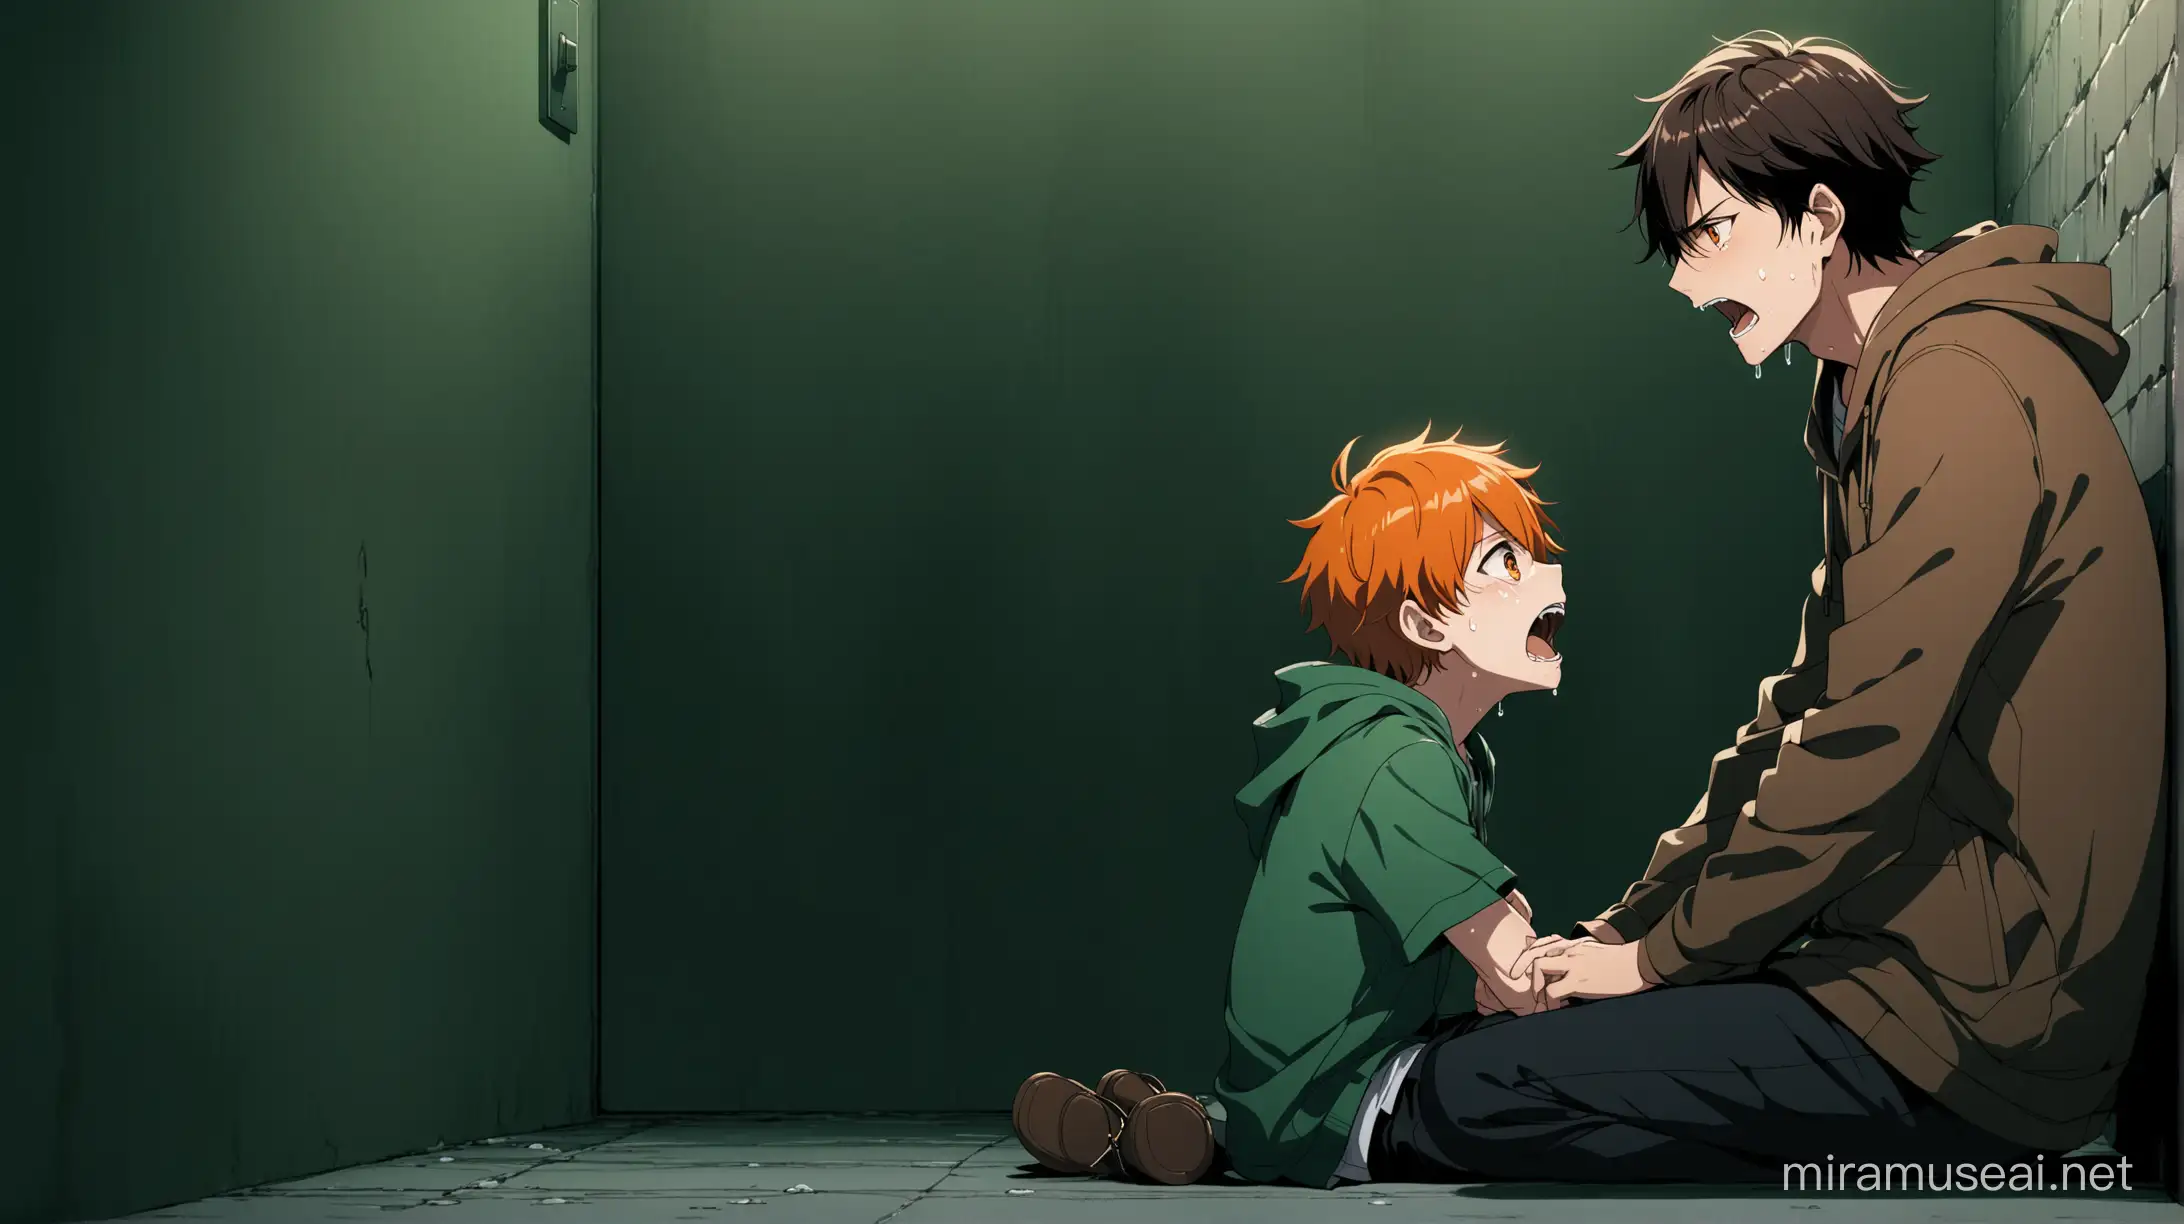 A side view image of of two anime characters in which there is a boy teenager who is handcuffed, crying, screaming to his dad who is injured badly and sitting on the floor unconsciously. The boy is teenager, crying, orange headed, orange eyes, wearing dark green hoodie, handsome talking to his unconscious father sitting on the floor of an underground secret room with dark green contrasts and vibe. His father is unconscious, injured, detective, dark brown headed, orange eyes, wearing detective clothes with dark brown and skin contrast. The image is of the boy who is screaming and talking to his father who is injured and sitting on the floor supporting a wall